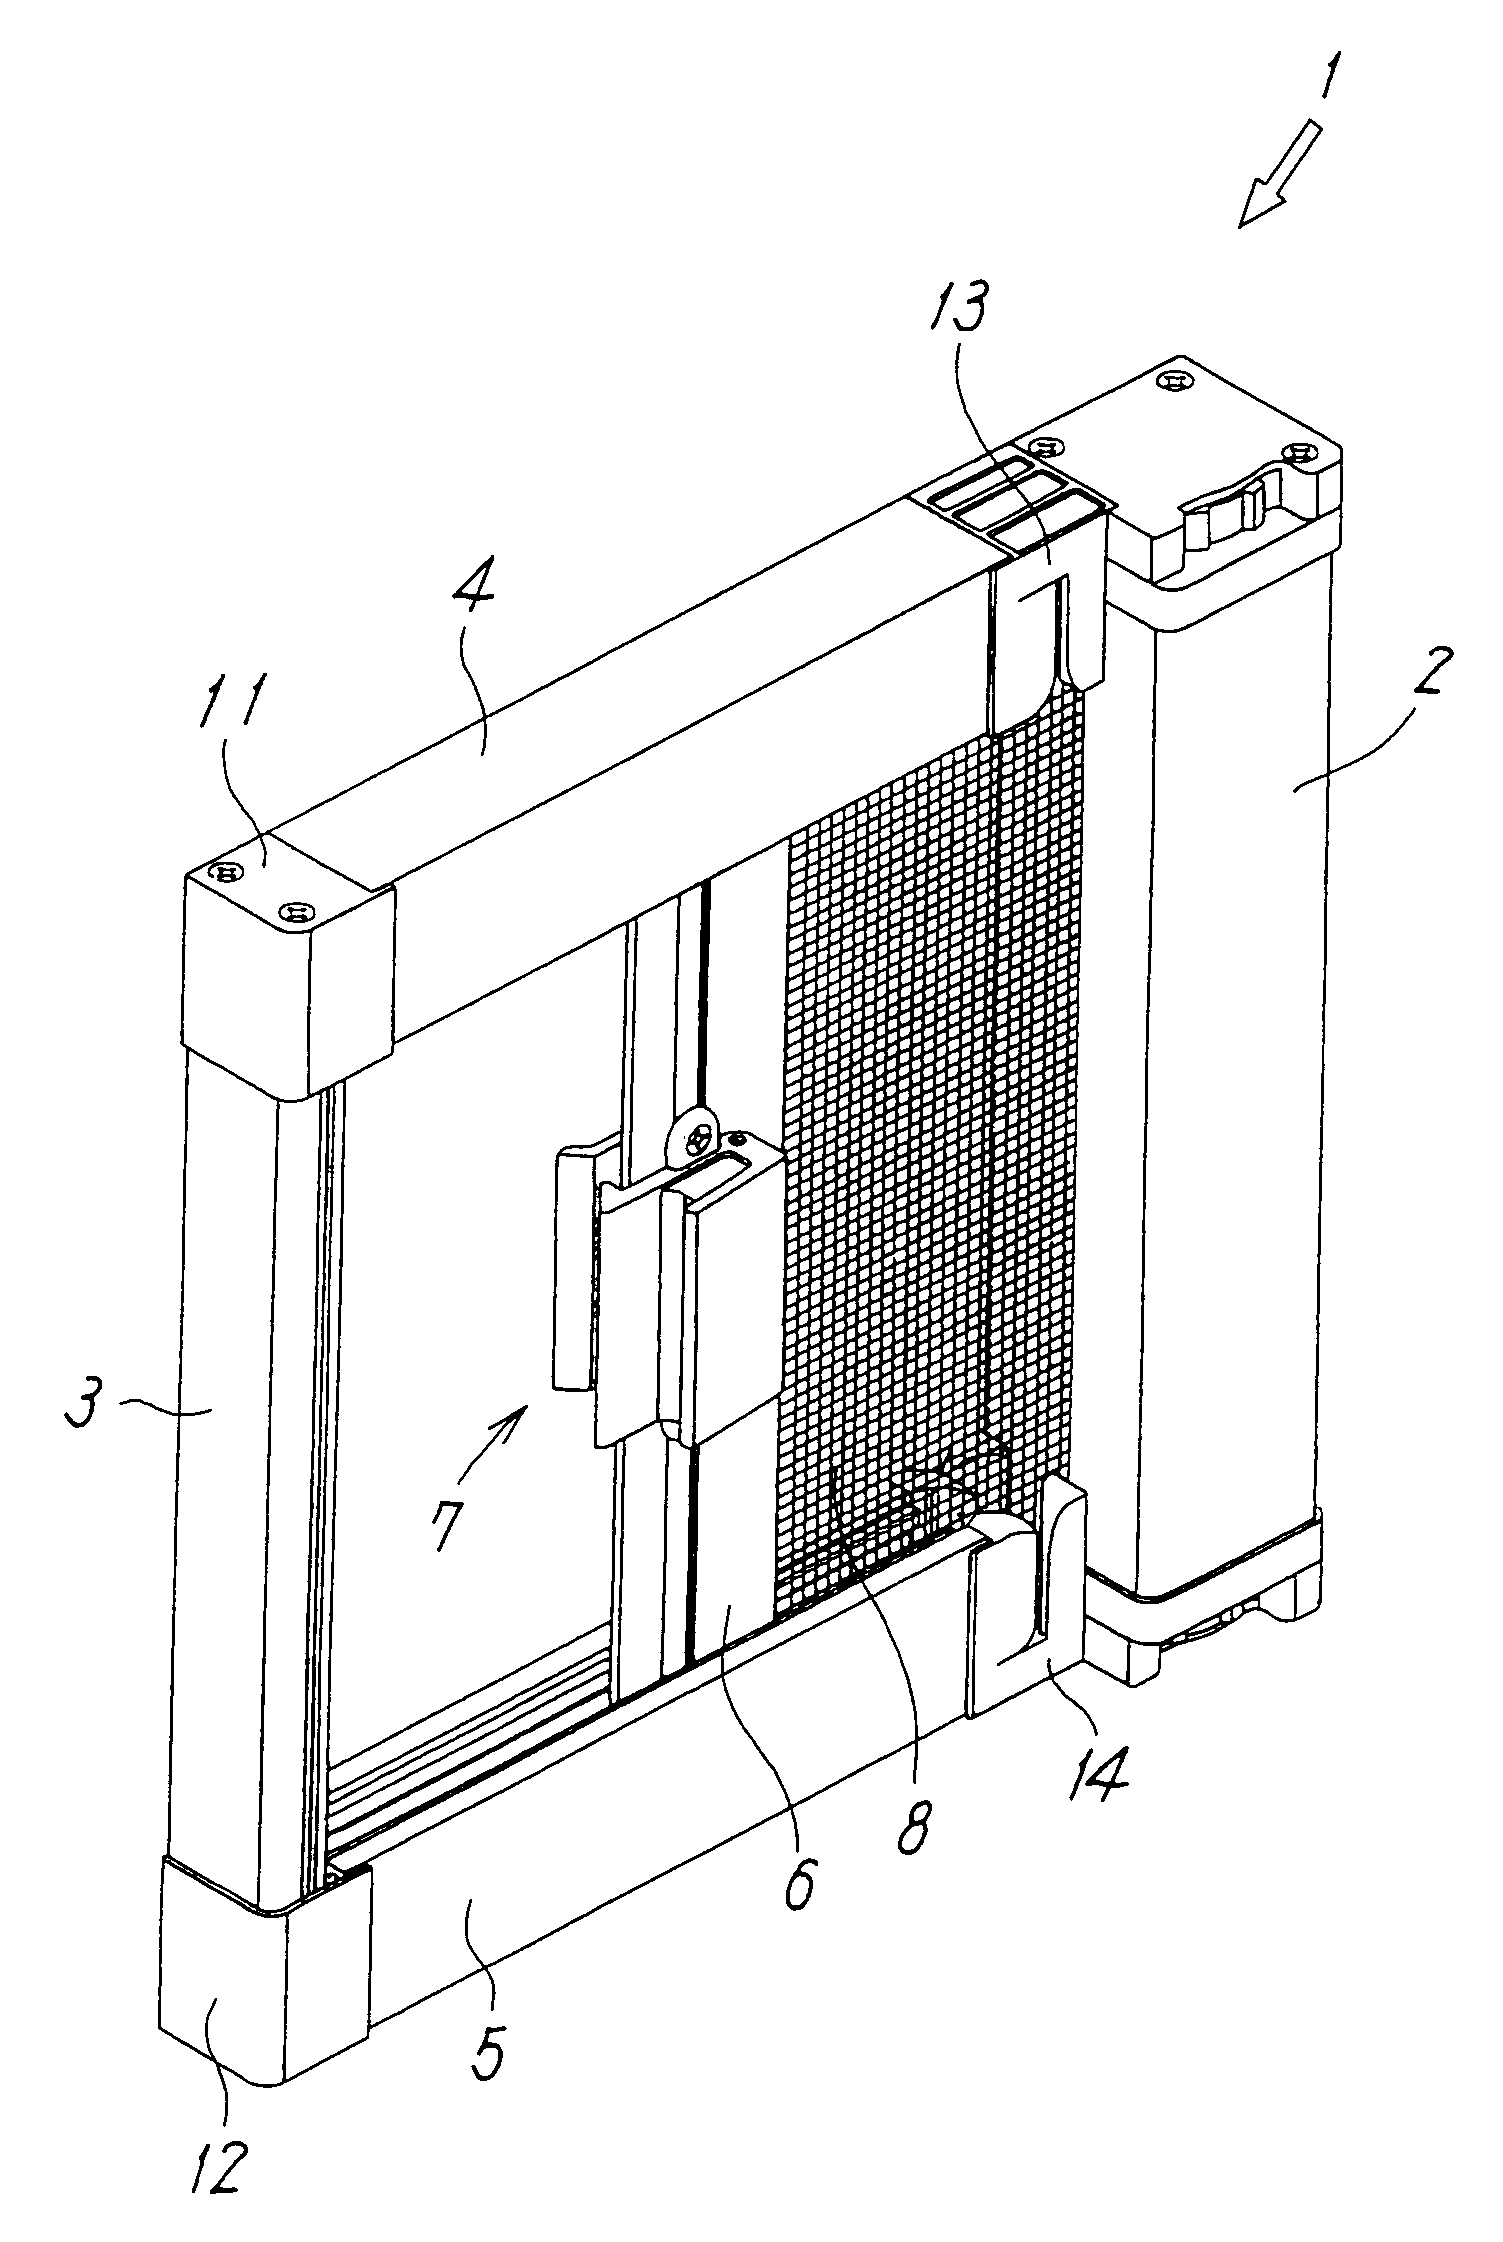 Take up-type screen device whose lock is releasable from either inside or outside